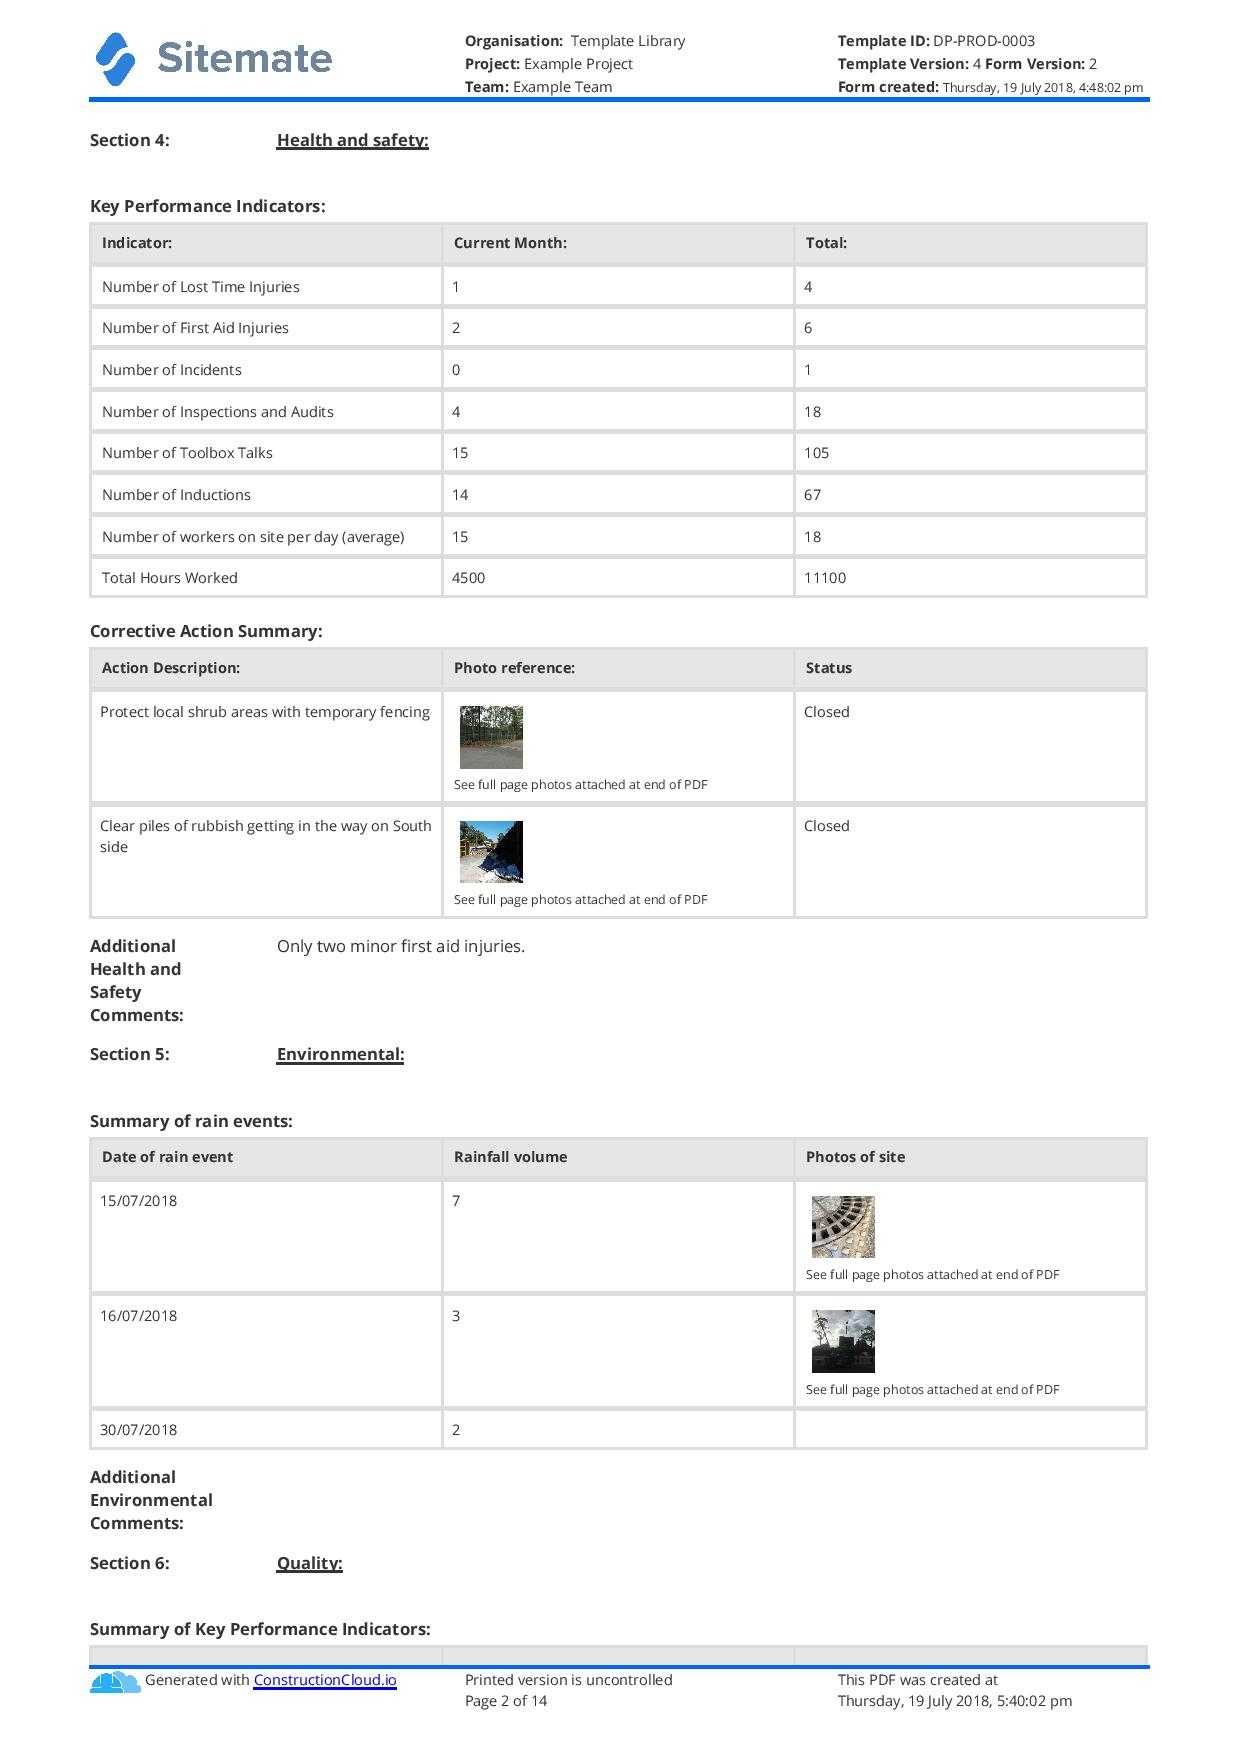 Monthly Construction Progress Report Template: Use This In Monthly Health And Safety Report Template